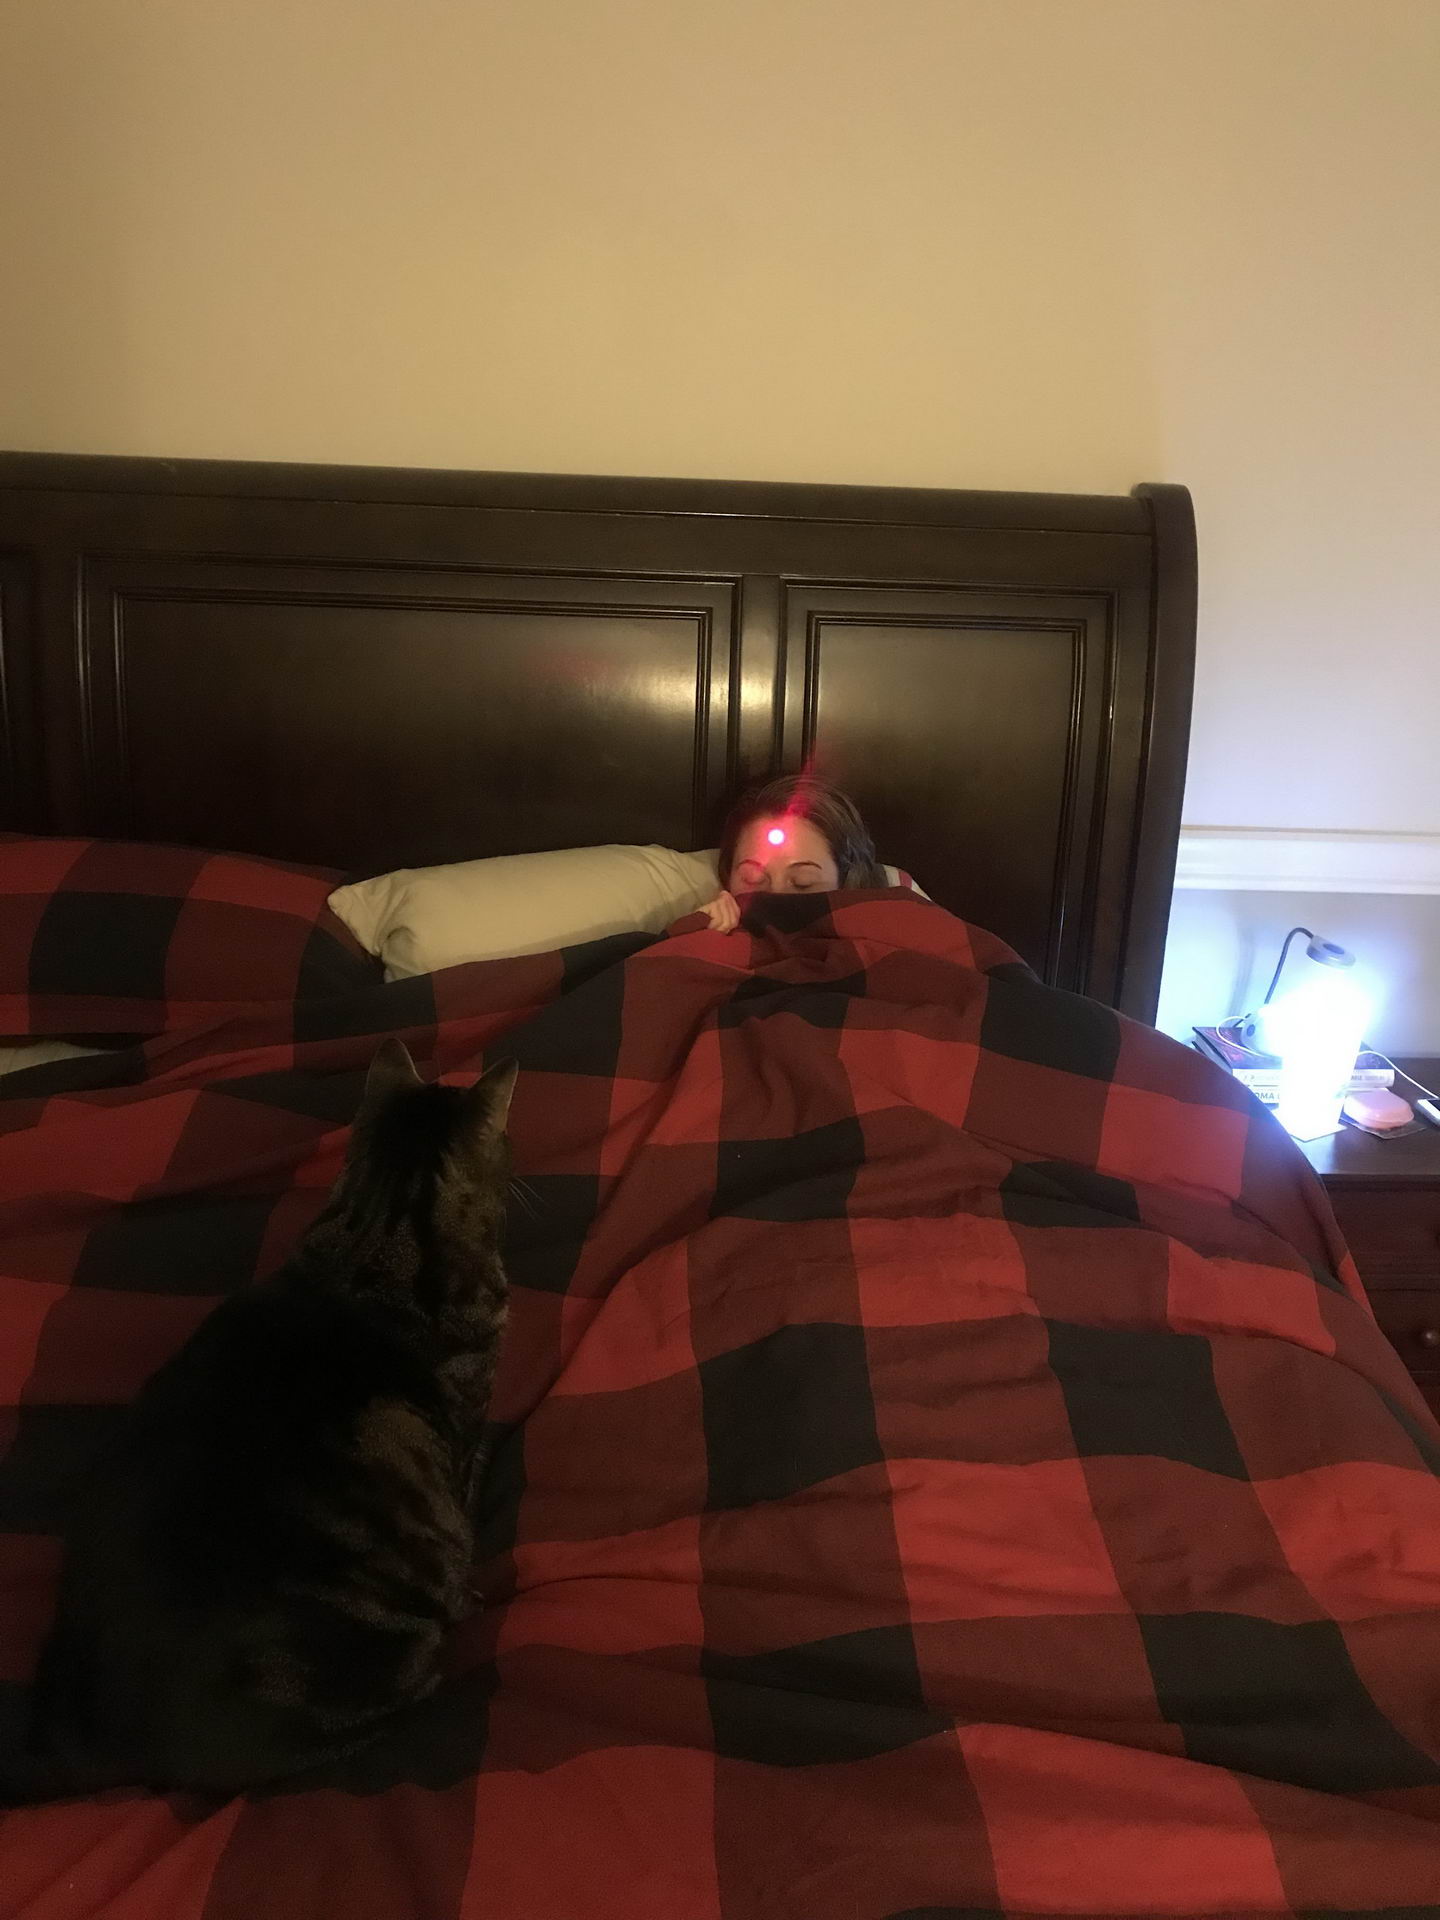 laser on sleeping woman's forehead to make the cat pounce on her and wake her up